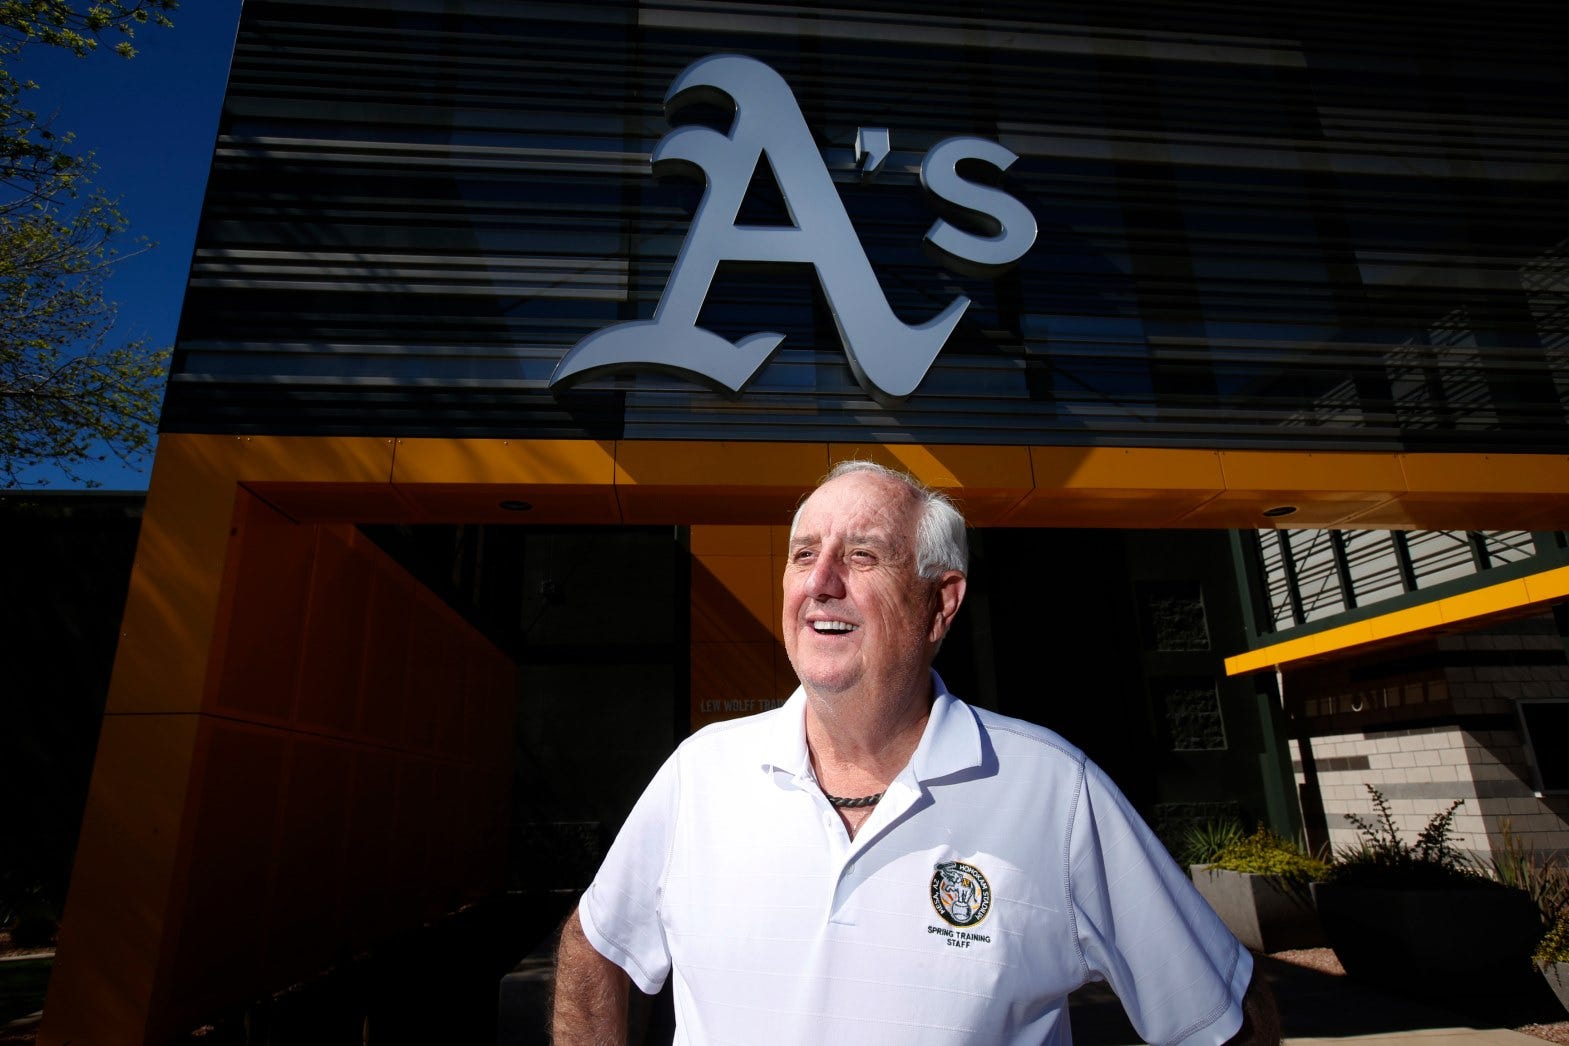 Why do the A's wear green? You can thank Charlie Finley